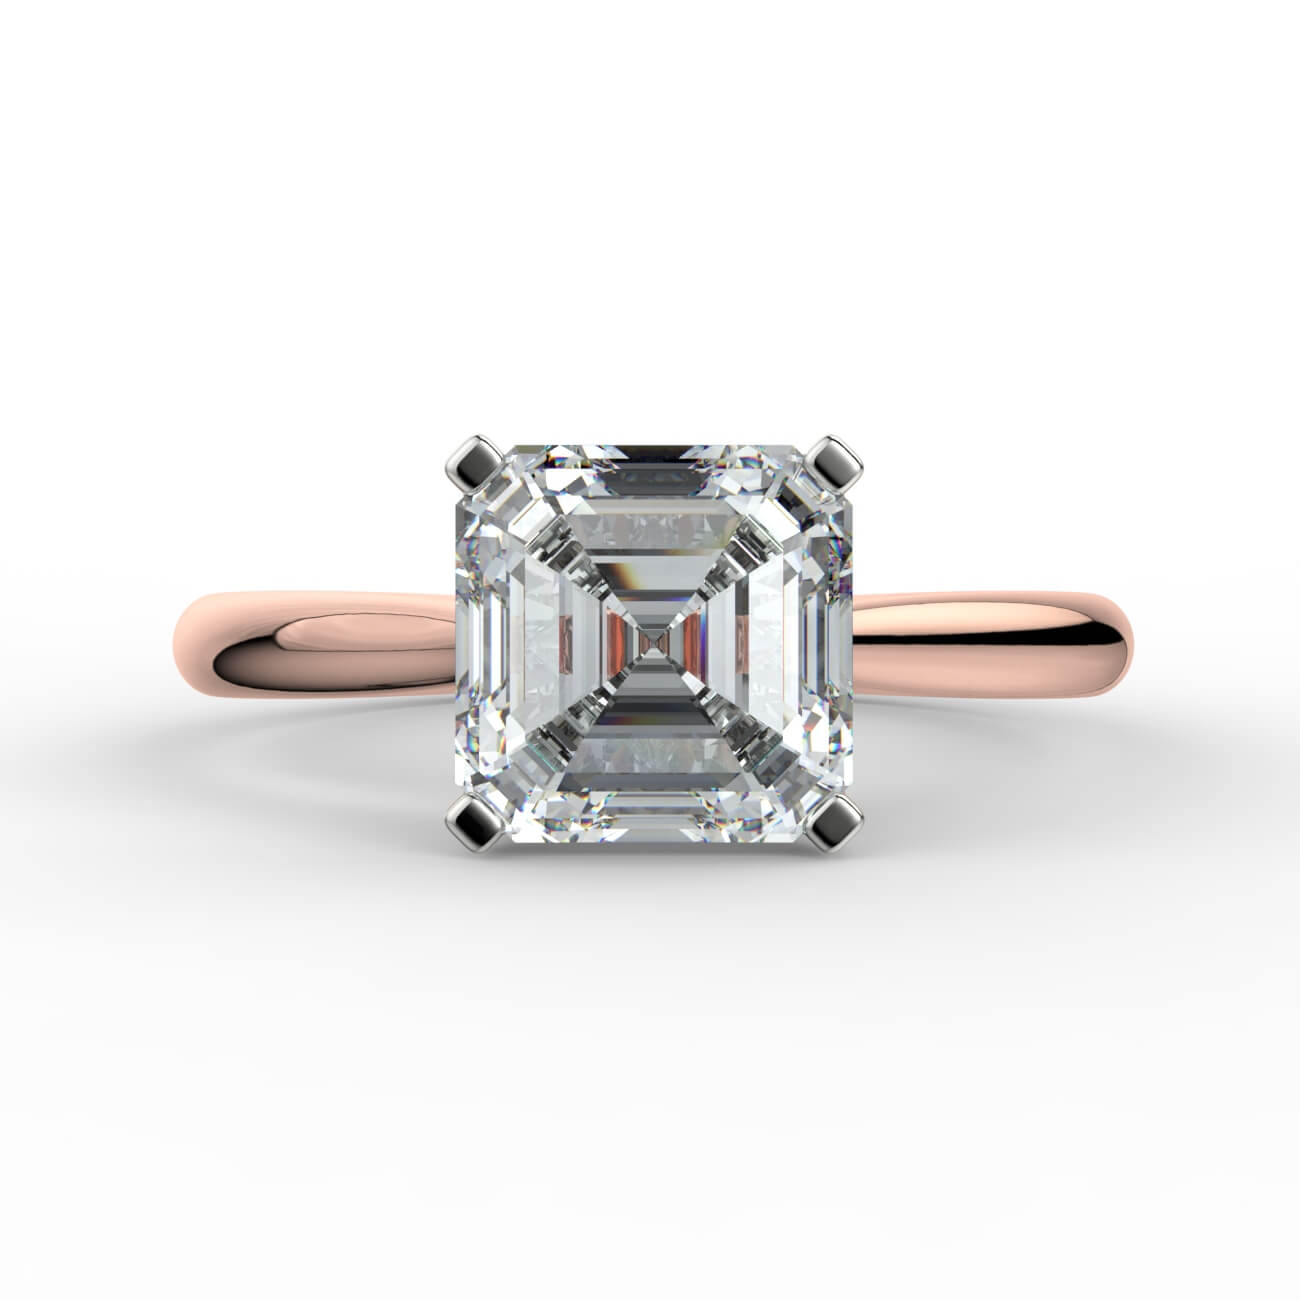 Asscher cut diamond cathedral engagement ring in white and rose gold – Australian Diamond Network